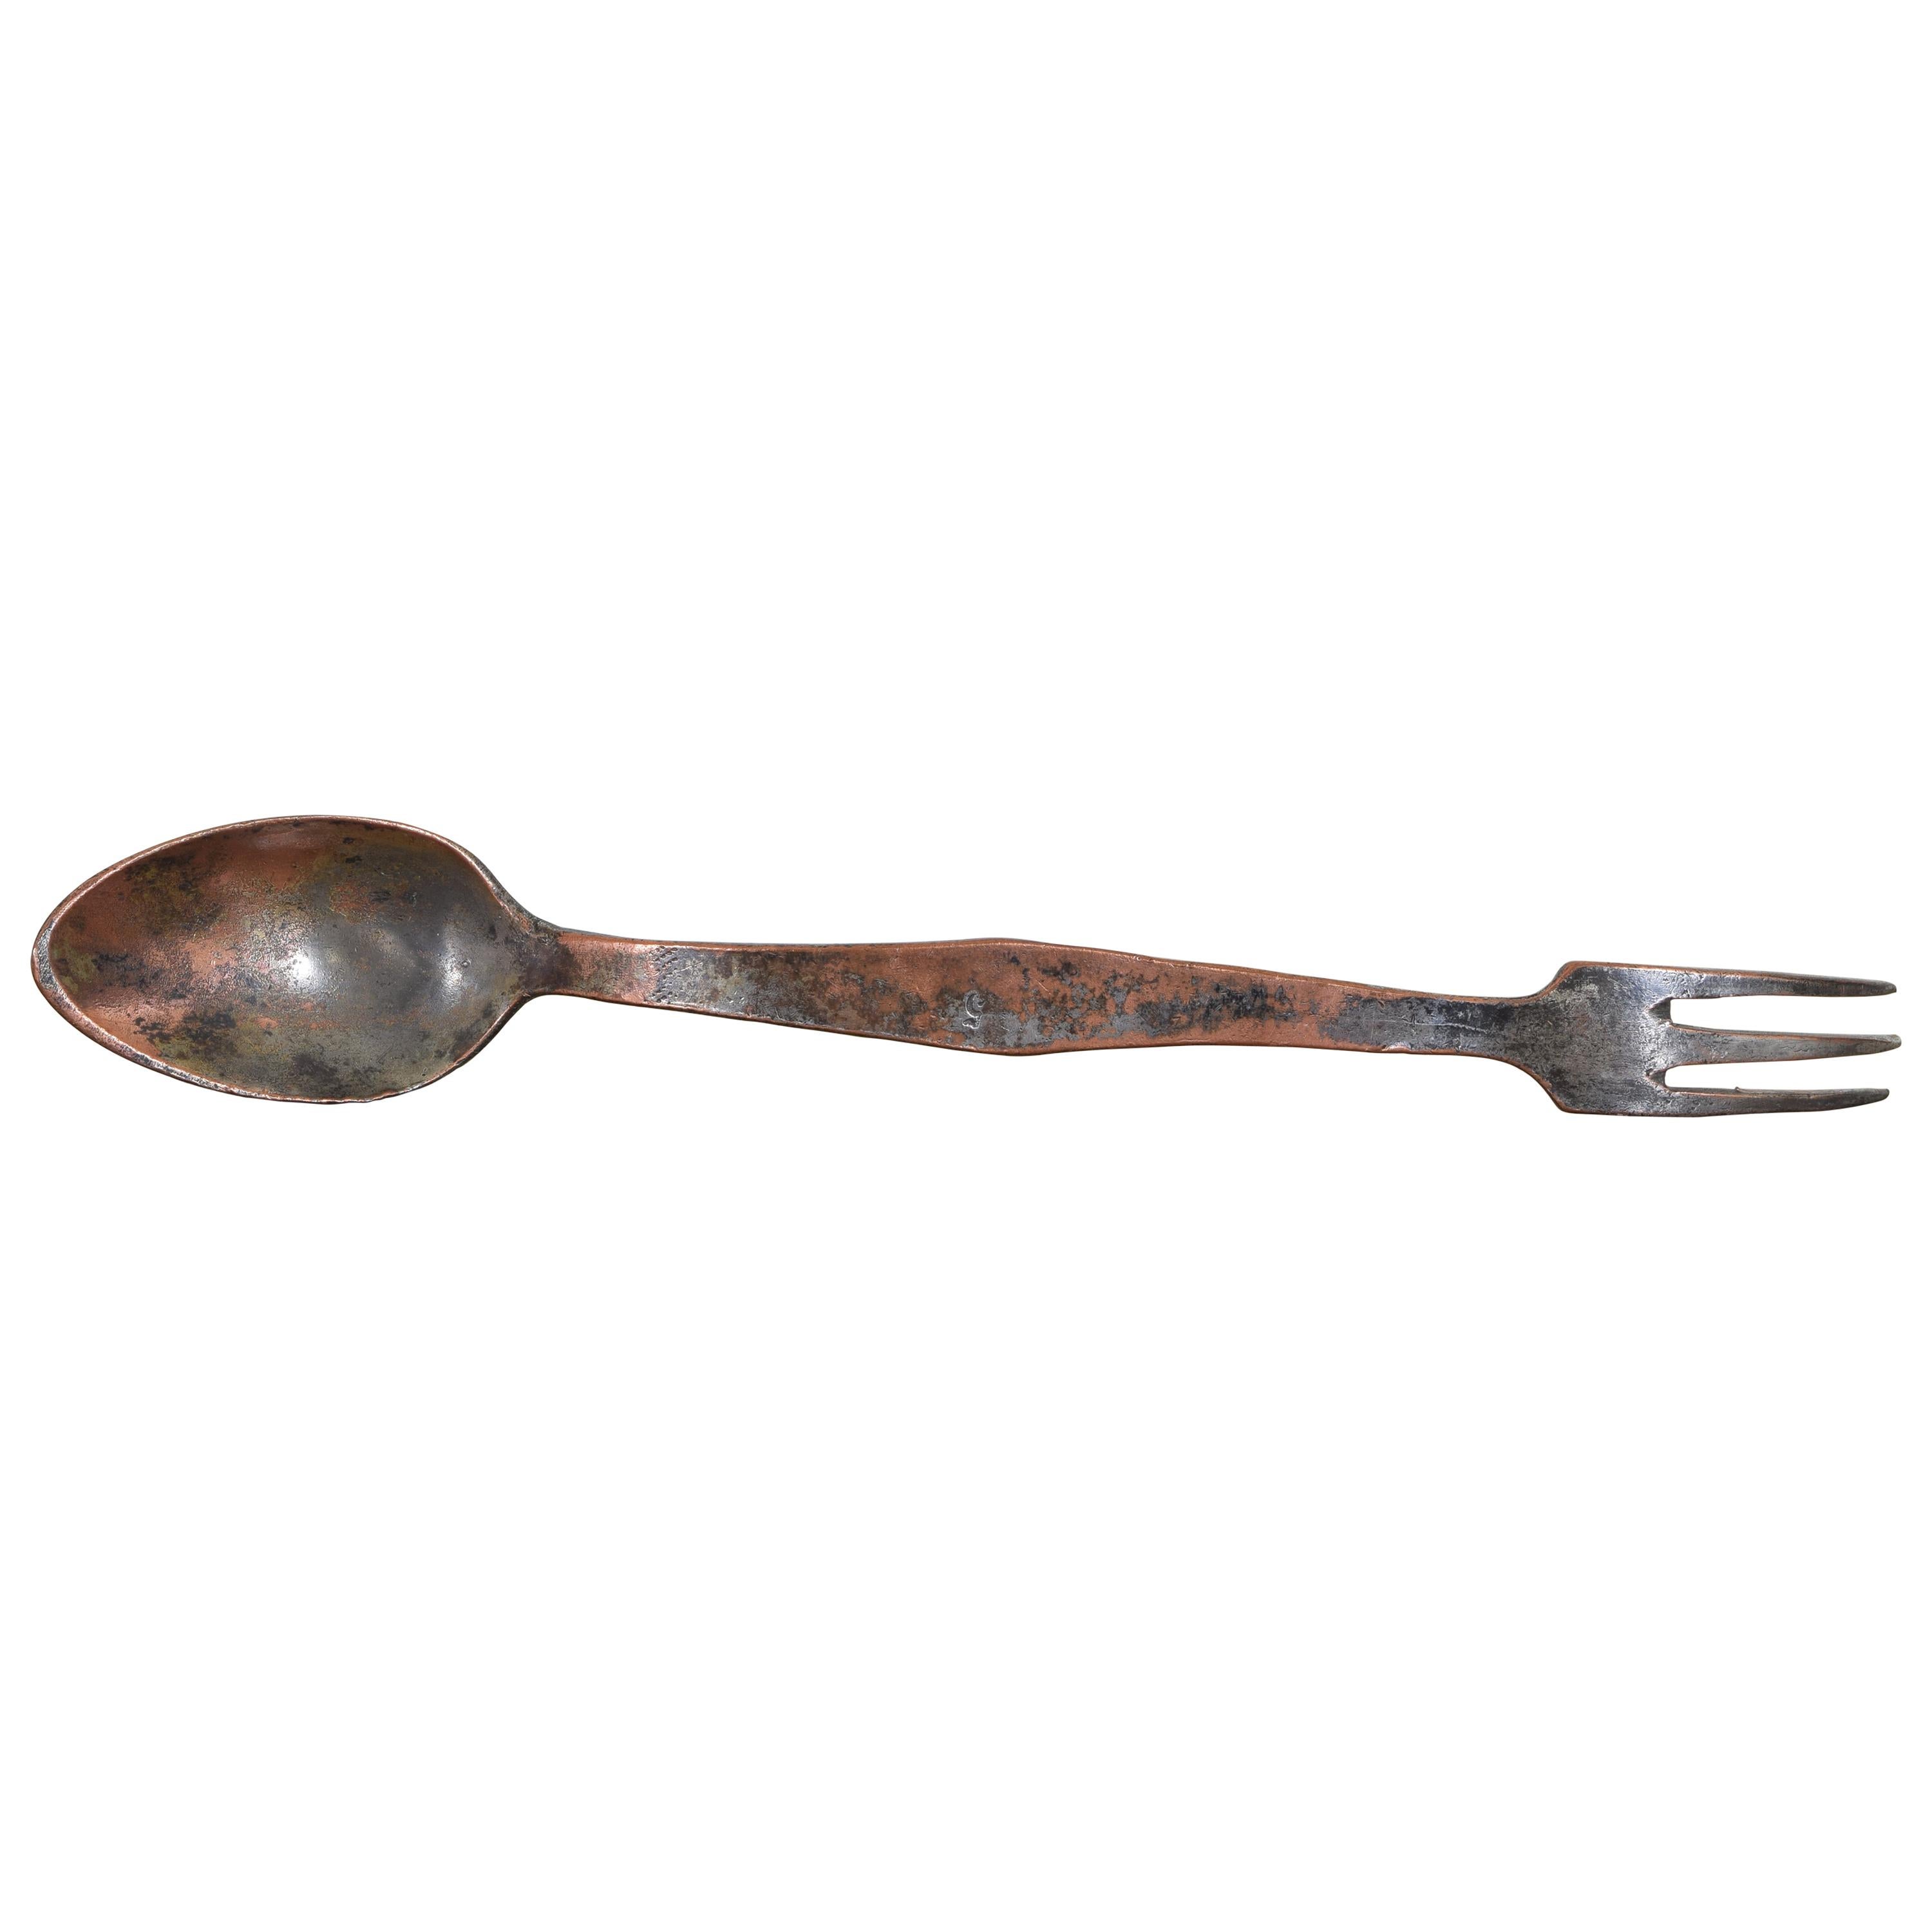 French "Spork" in Silver Plated Copper, Marked "LEGRY", 19th-20th Century